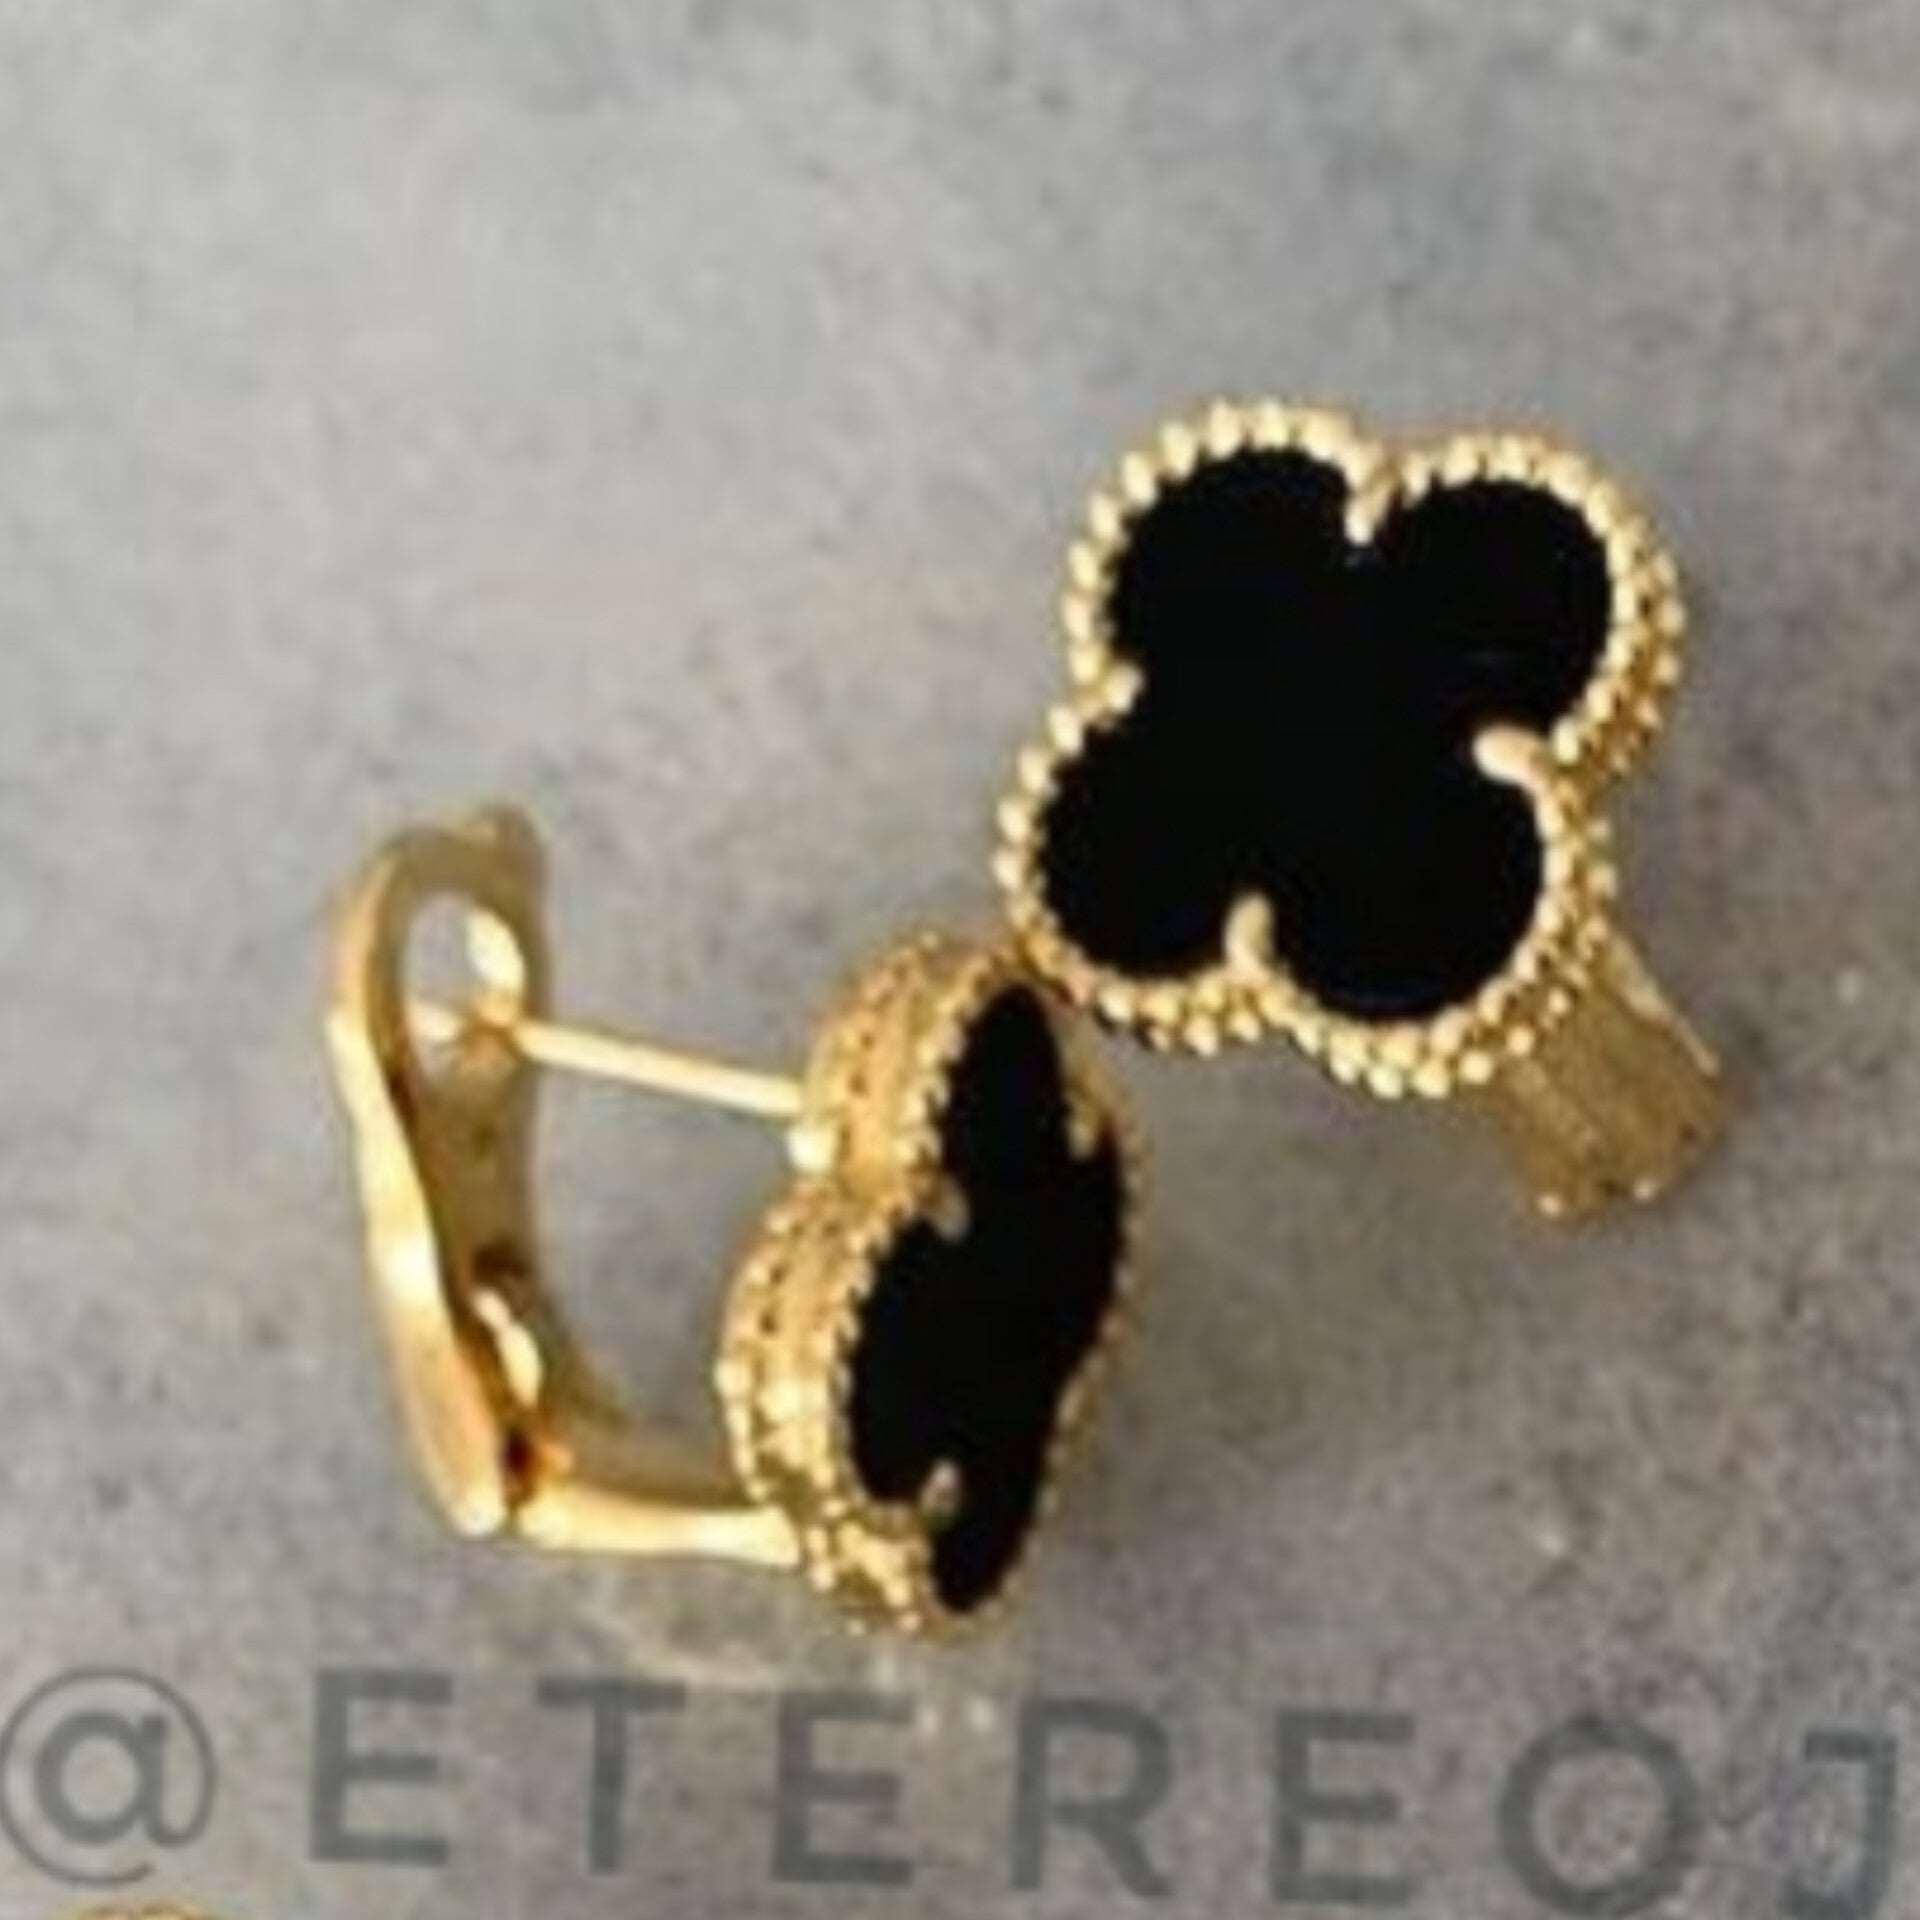 Clover Earrings Etereo vc with clip